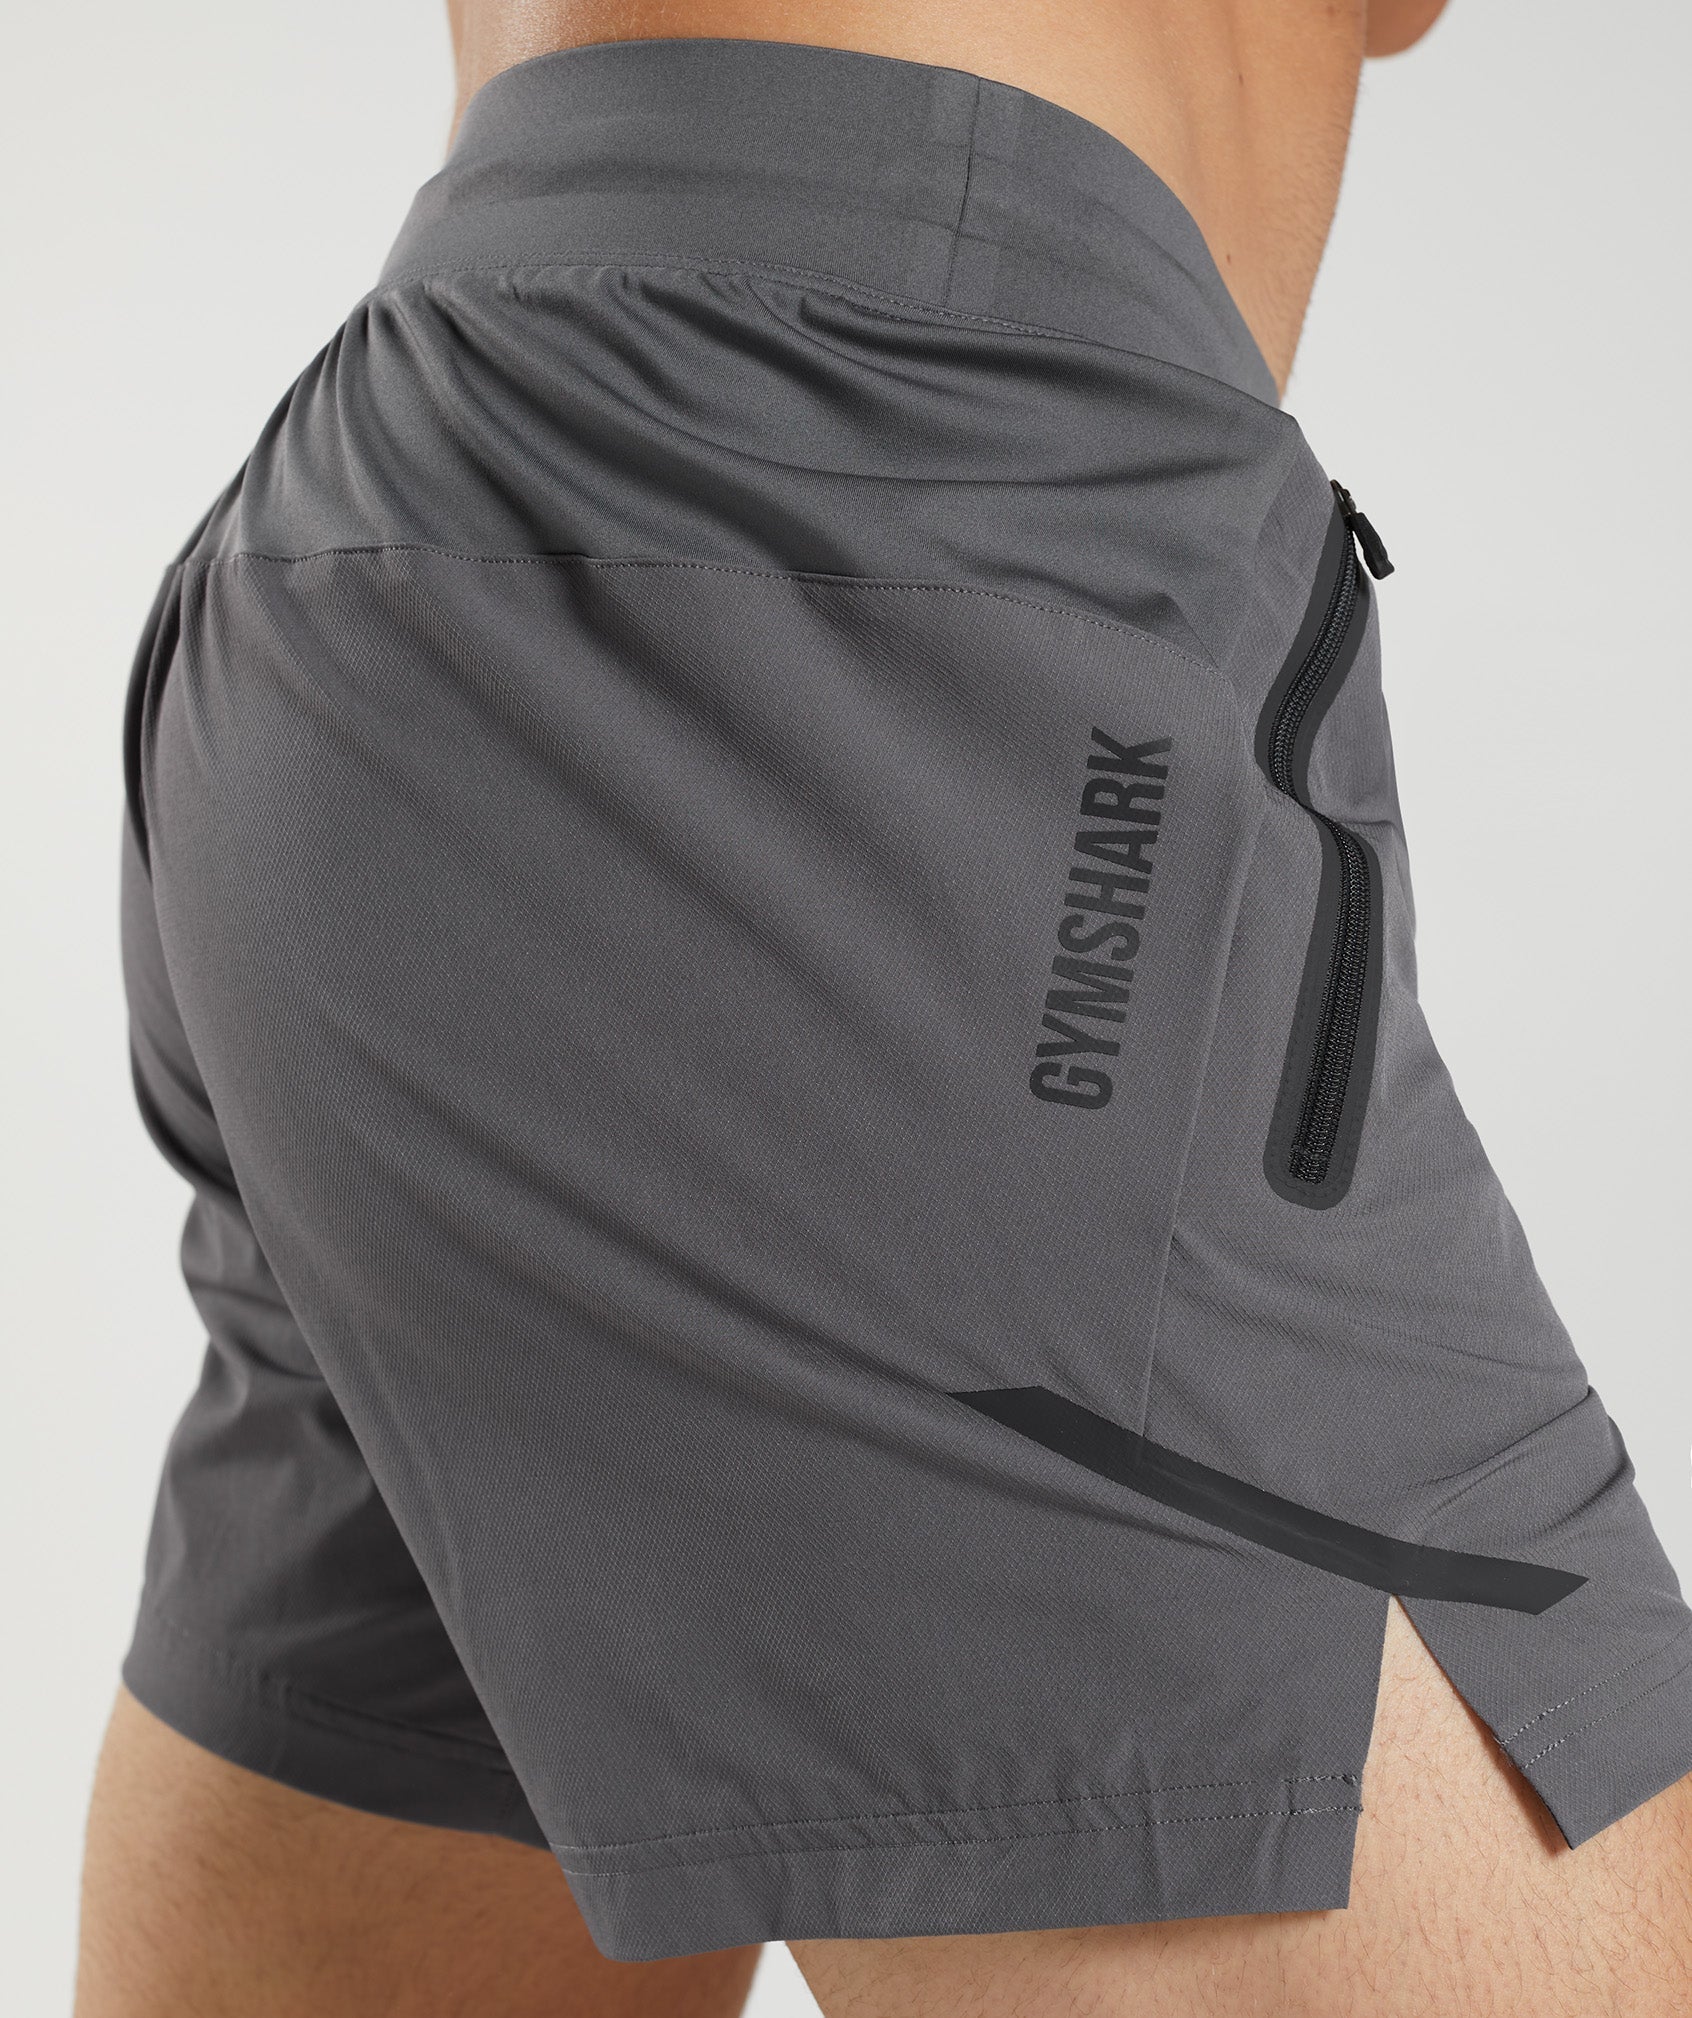 Apex 5" Perform Shorts in Silhouette Grey - view 5